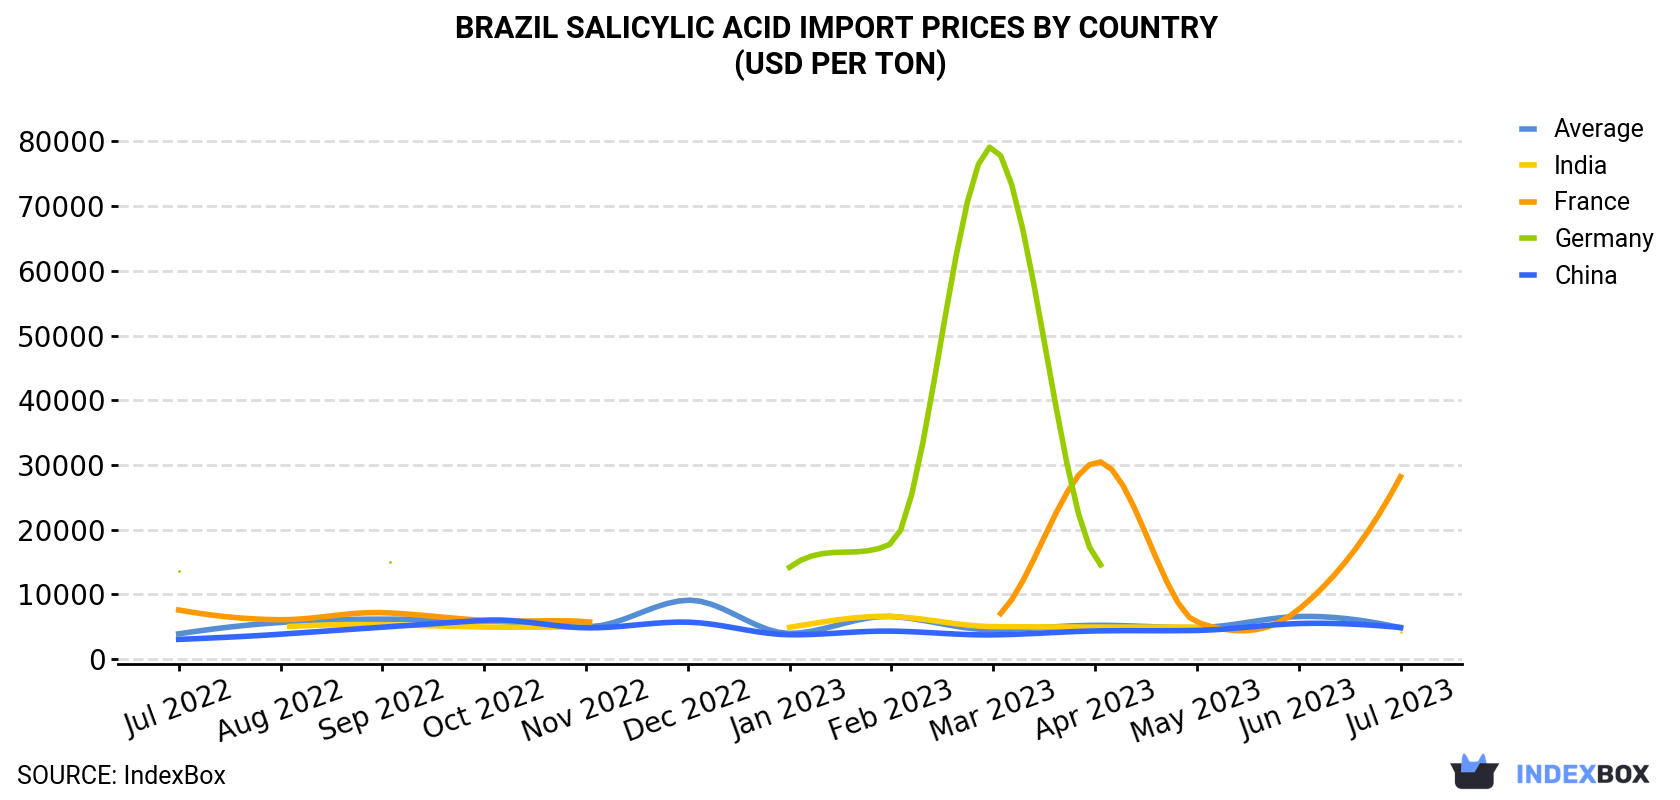 Brazil Salicylic Acid Import Prices By Country (USD Per Ton)